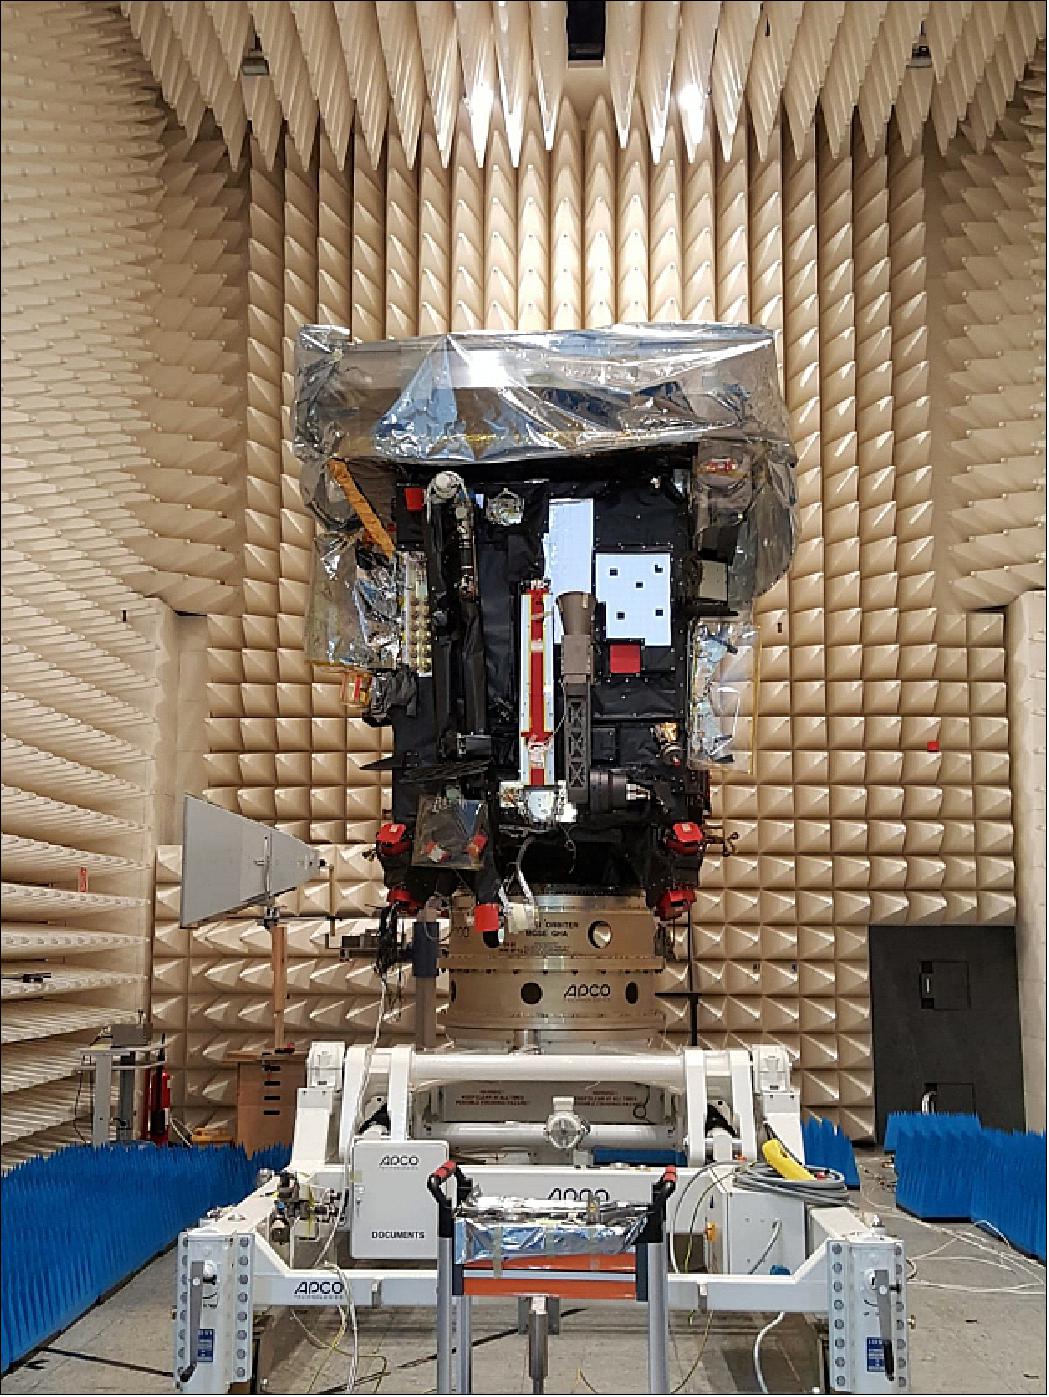 Figure 8: The Solar Orbiter spacecraft, ready to start electromagnetic compatibility (EMC) testing in a special anechoic chamber in May 2019 at the IABG facility in Ottobrunn, Germany. These tests verified that the spacecraft's electrical equipment will be fully electromagnetically compatible throughout all phases of the mission (image credit: Airbus Defence and Space)